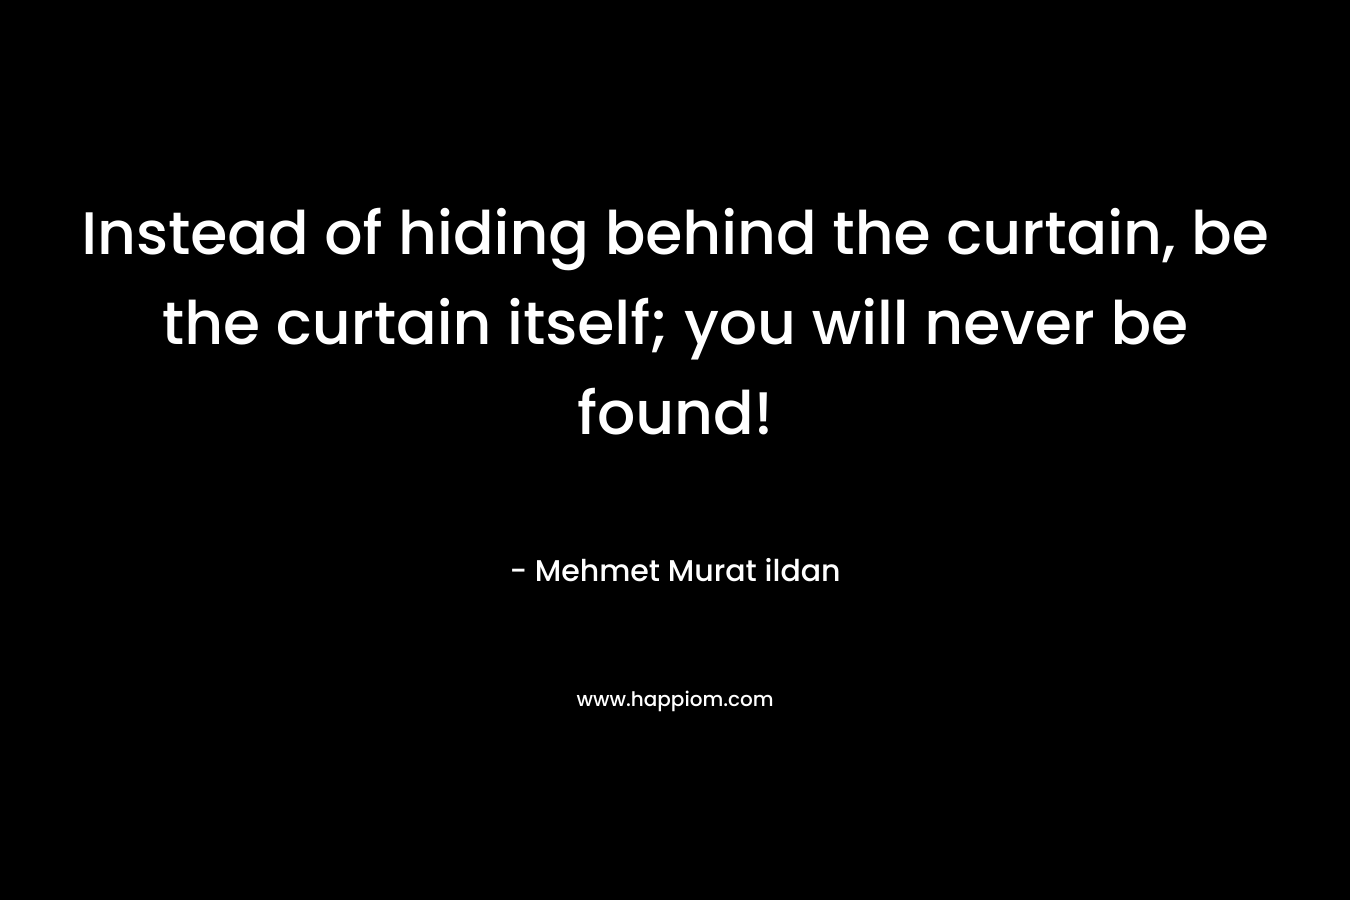 Instead of hiding behind the curtain, be the curtain itself; you will never be found! – Mehmet Murat ildan